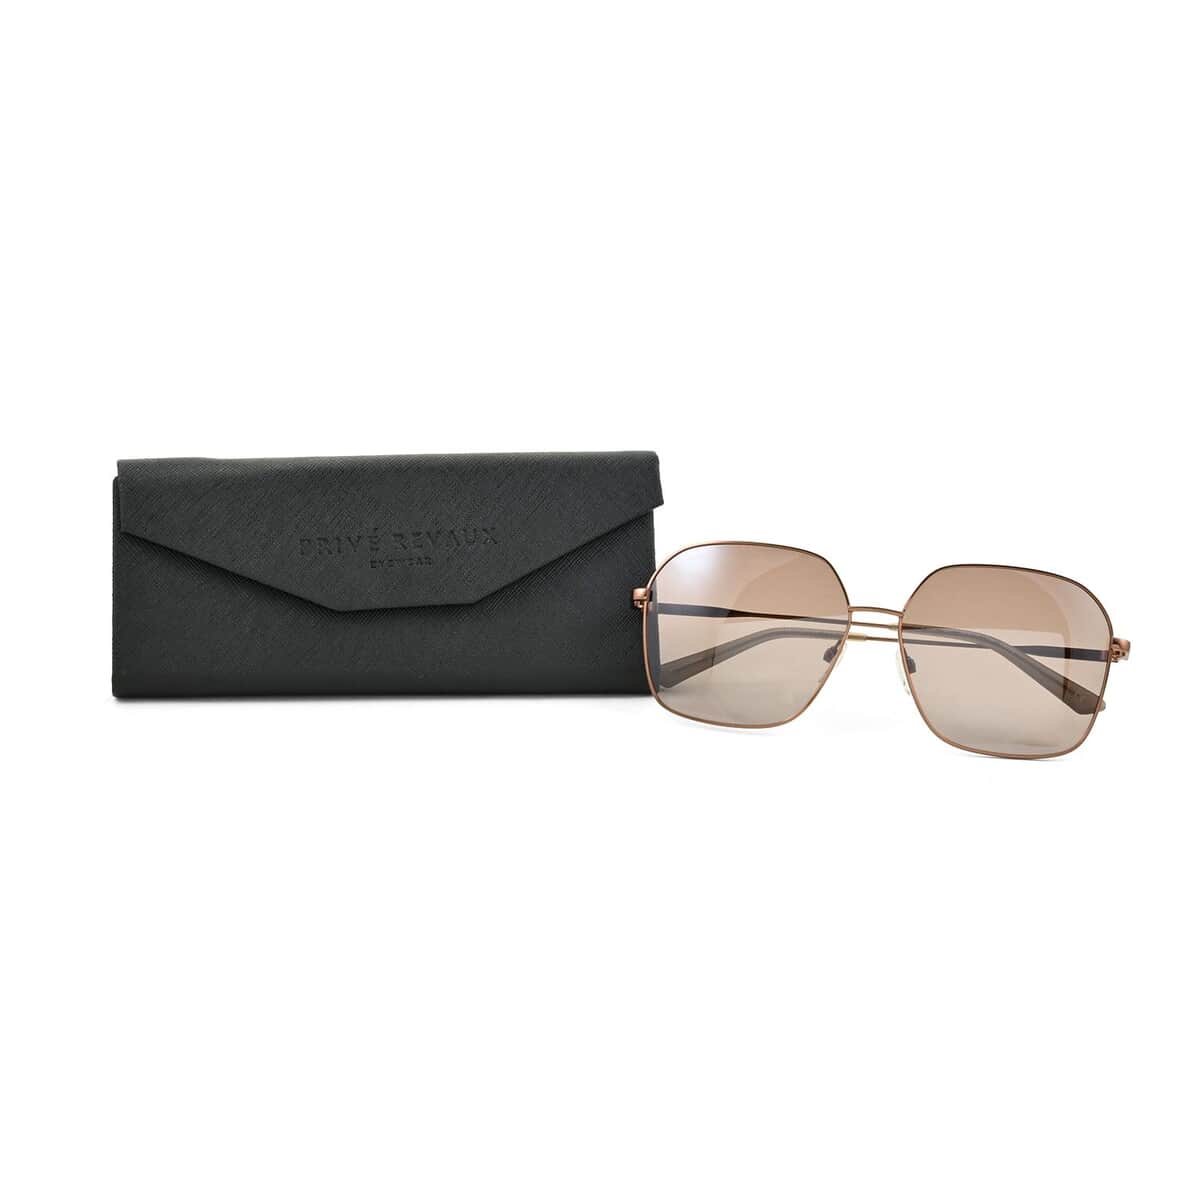 Prive Revaux Unisex Styles Brown Squared Sunglasses with Case and Cleaning Cloth image number 3